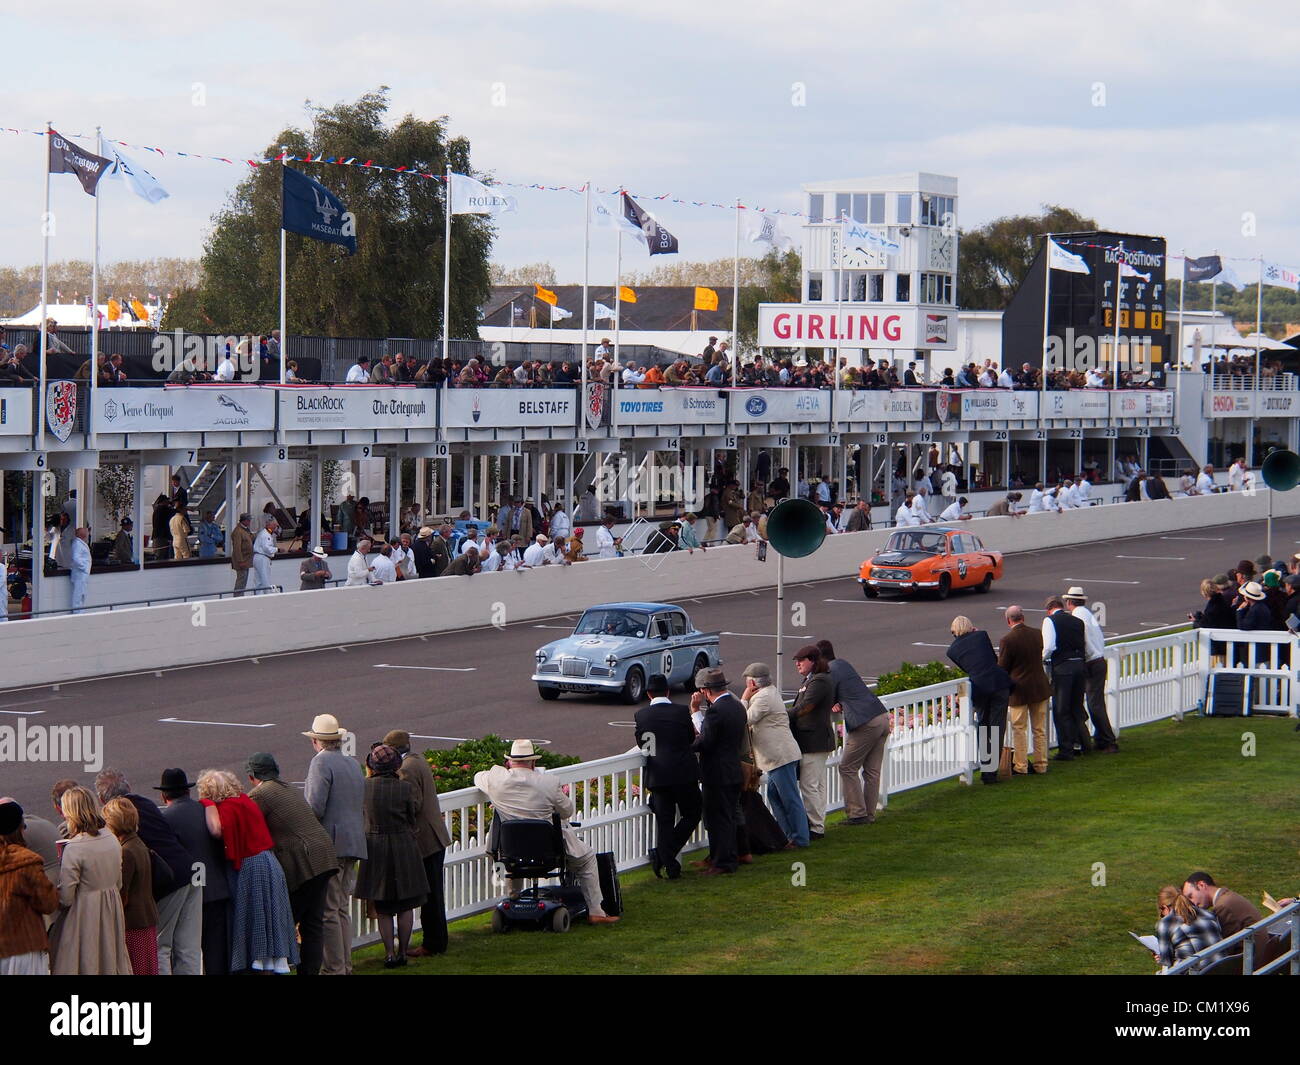 Goodwood Revival Practice Day Friday September 14th.2012. A racing Tatra in bright orange livery and carrying the number 20, and a Sunbeam Rapier carrying the number 19,approach the finish line in front of the pits and watching crowds at this historic venue. Stock Photo